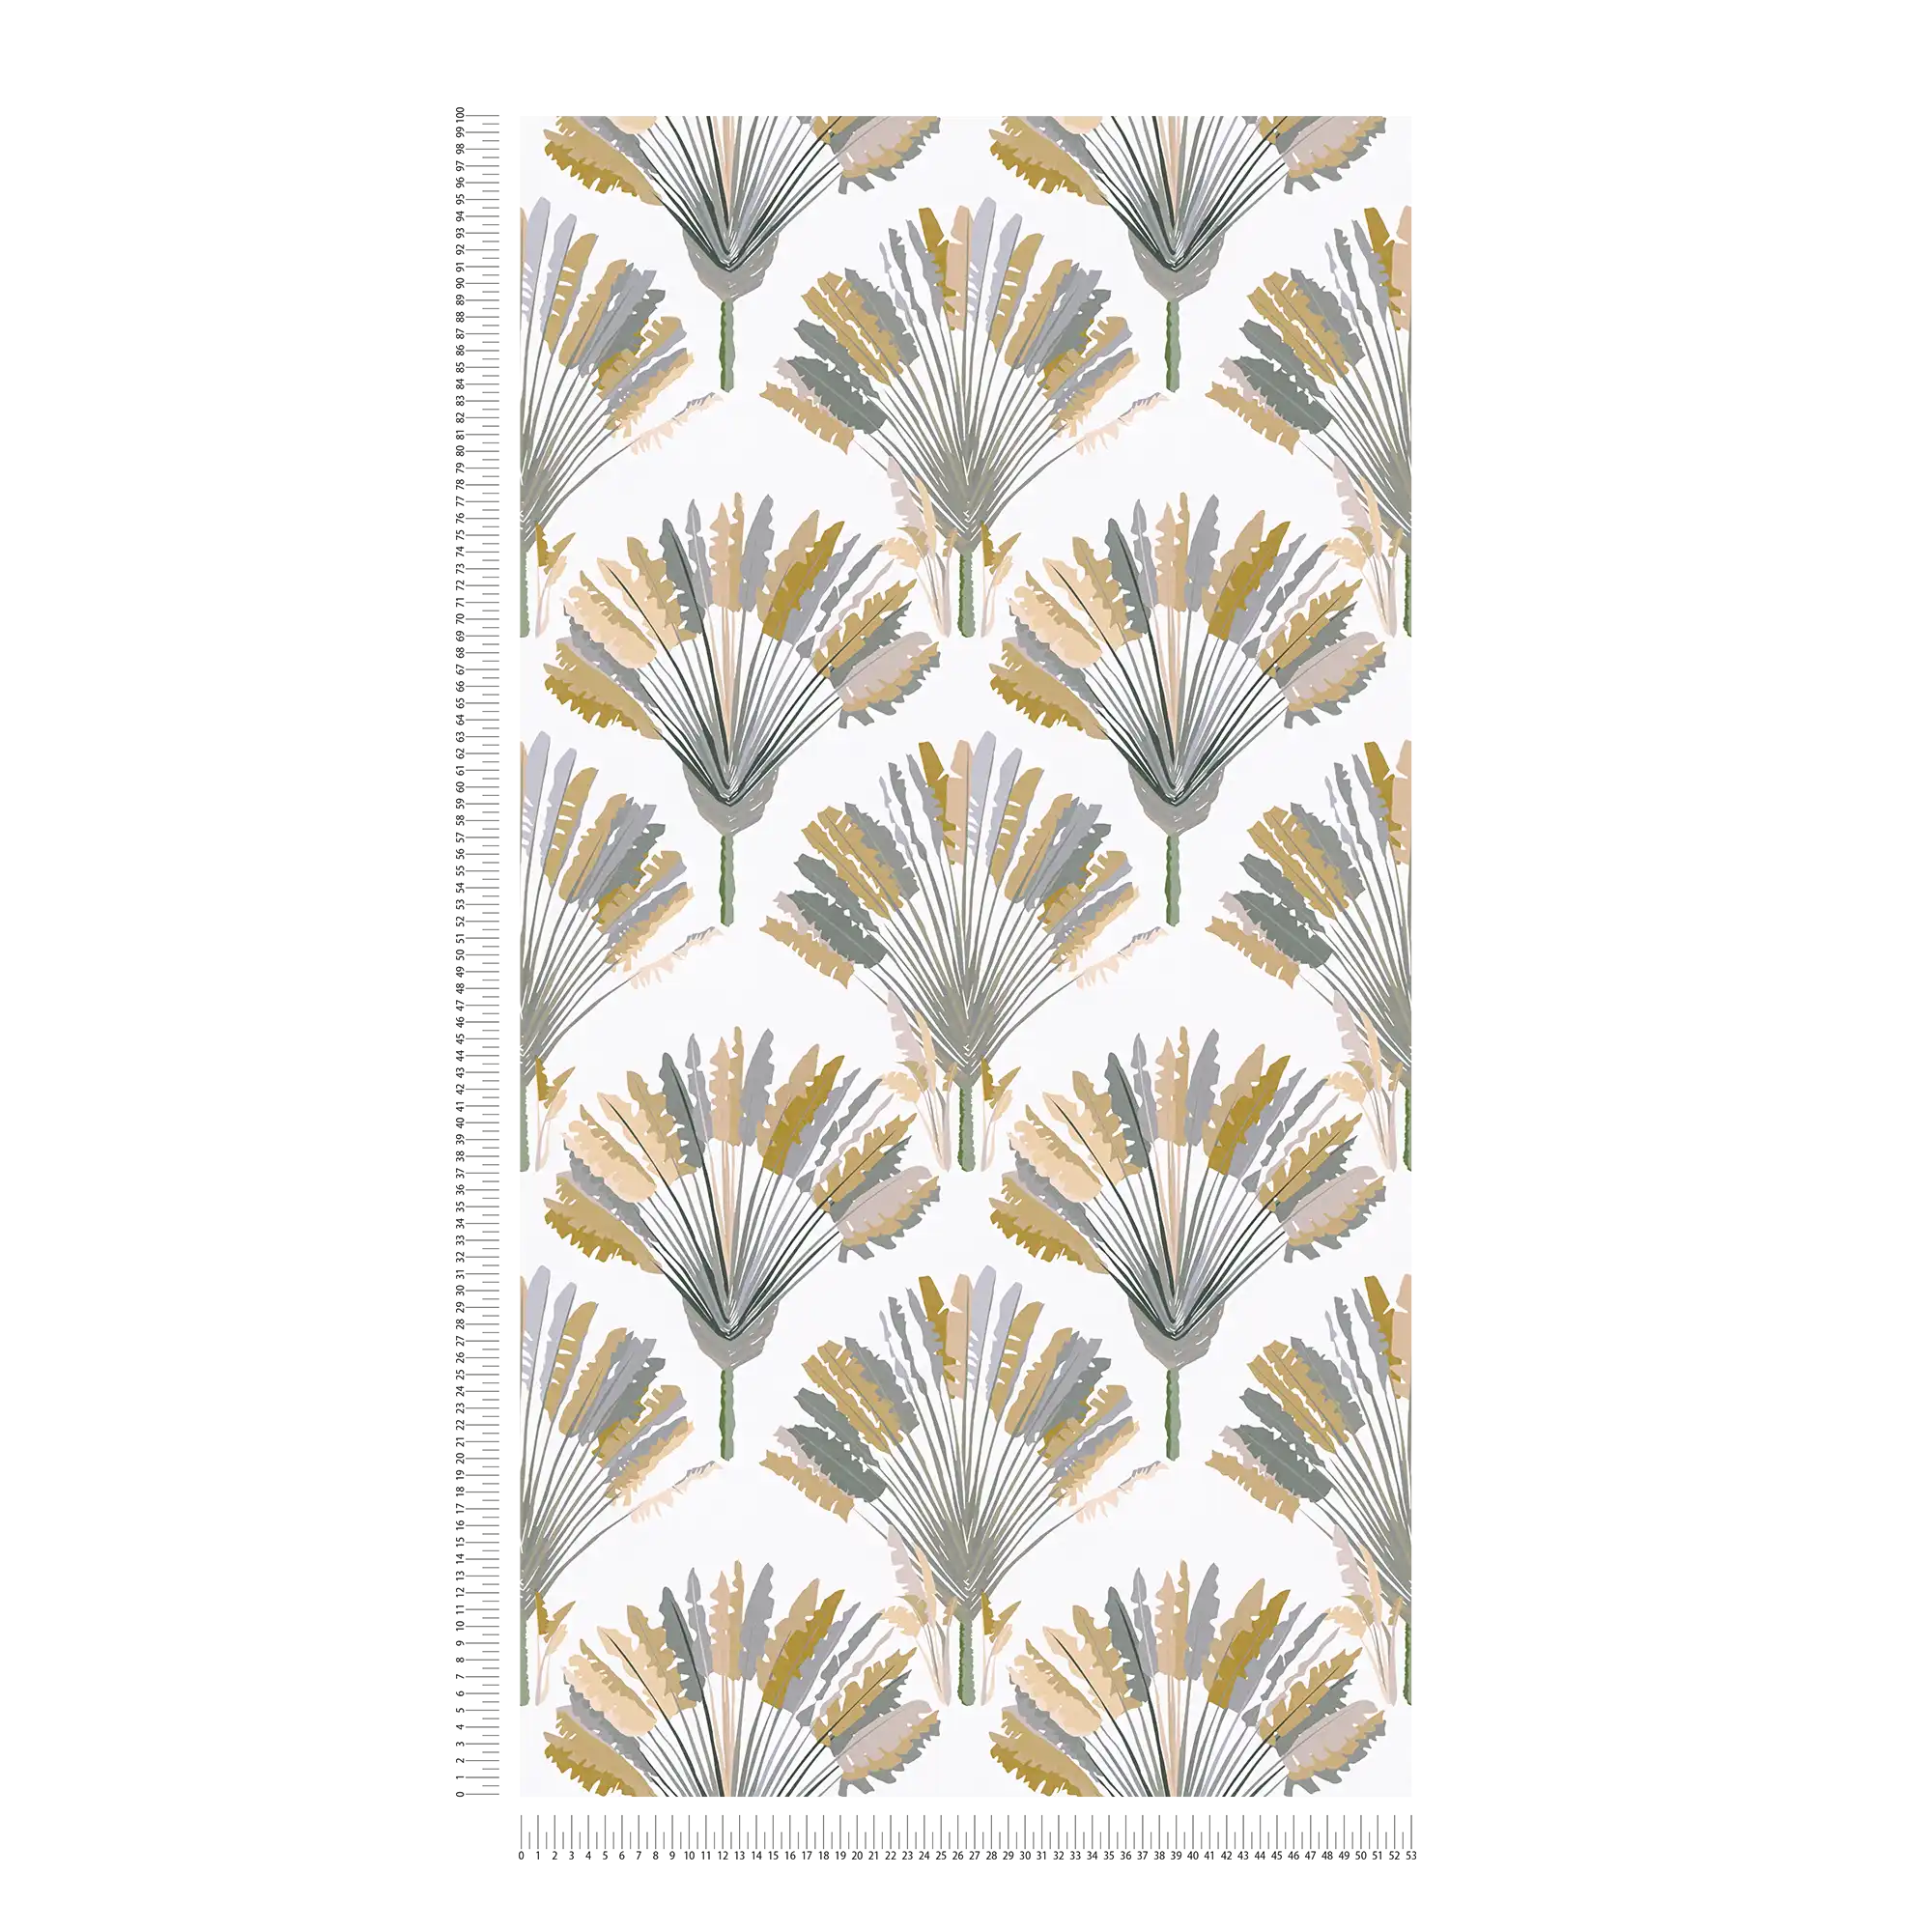             Palm trees wallpaper with pattern print in modern style - yellow, grey, white
        